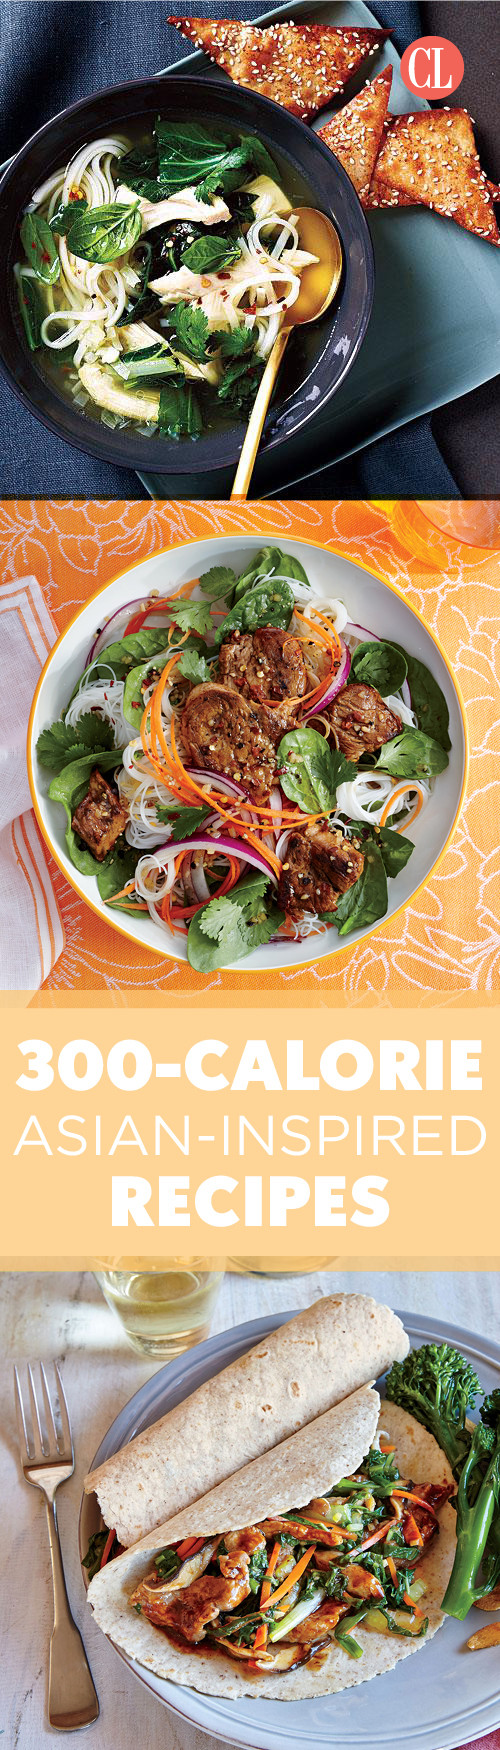 Low Calorie Asian Recipes
 300 Calorie Asian Inspired Recipes